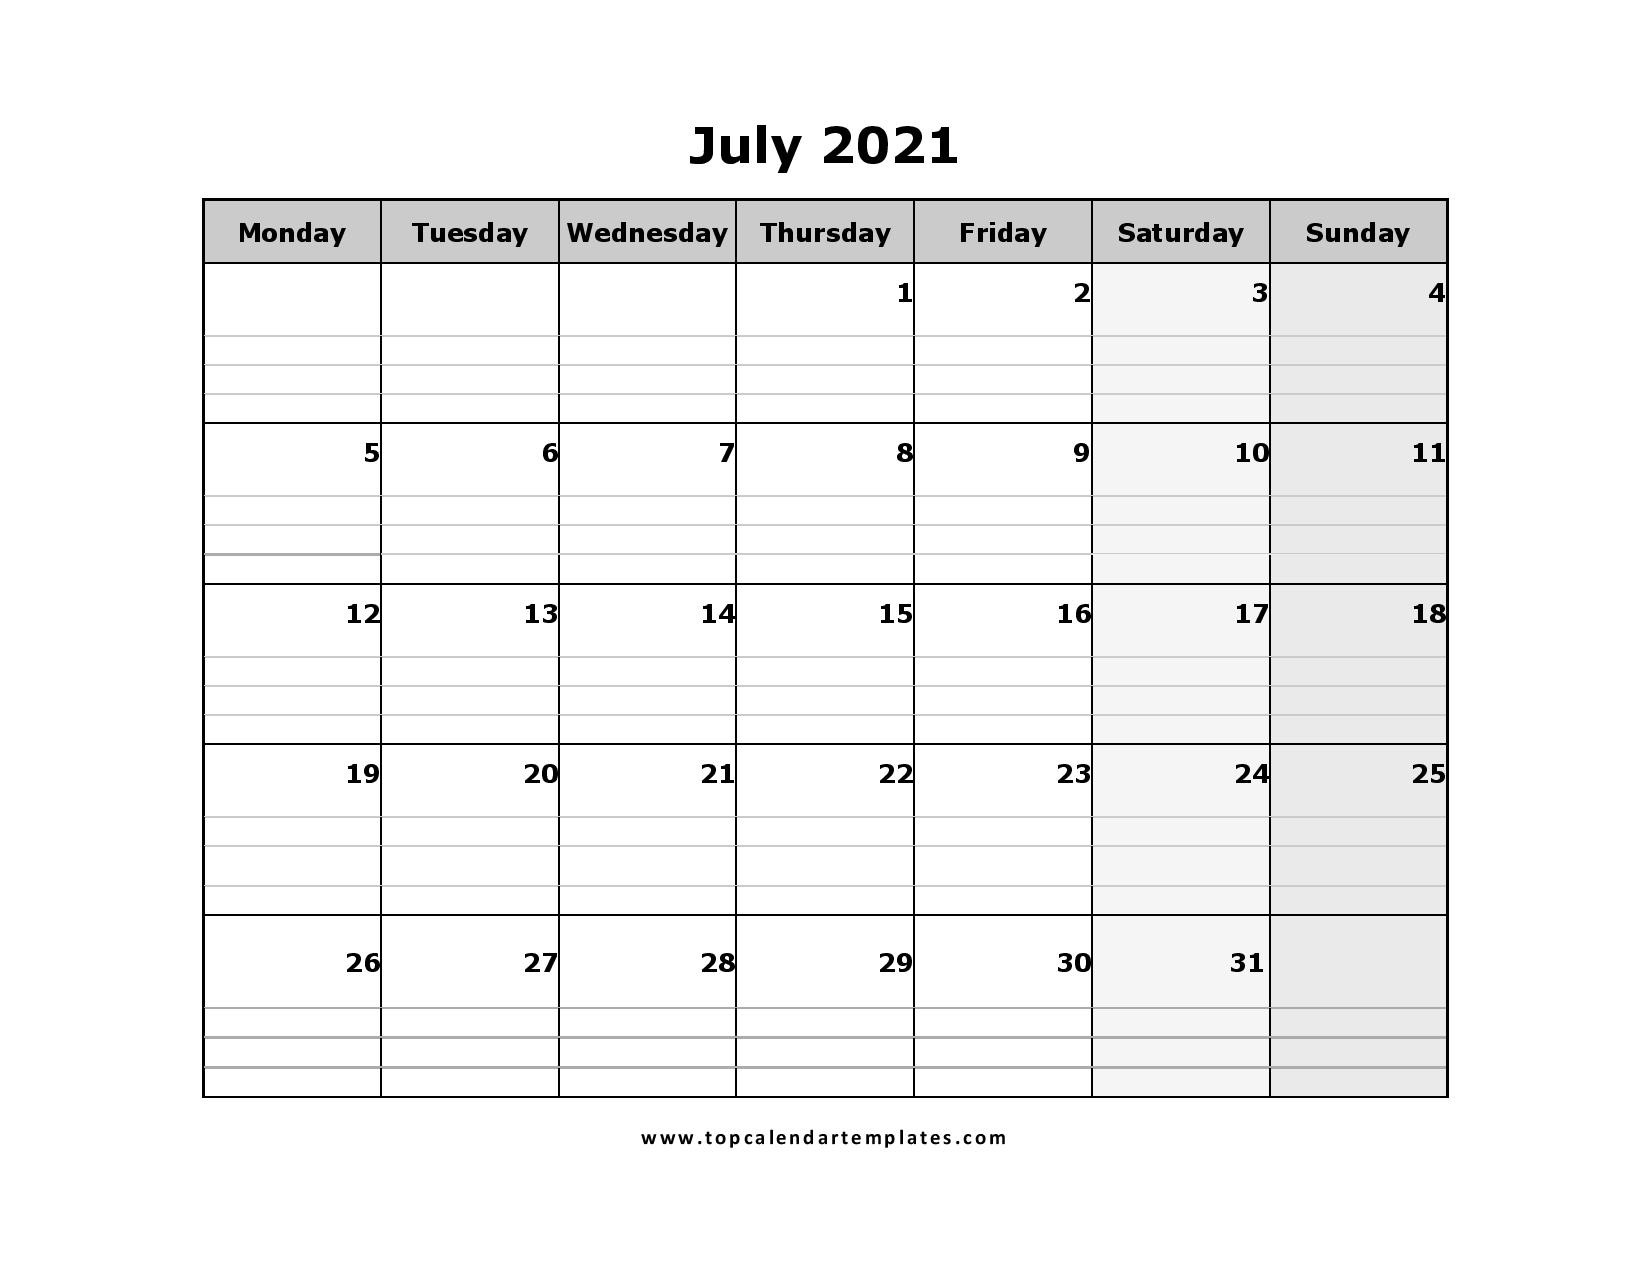 Printable July 2021 Calendar Template - Pdf, Word, Excel-Holiday Spreadsheet Template 2021